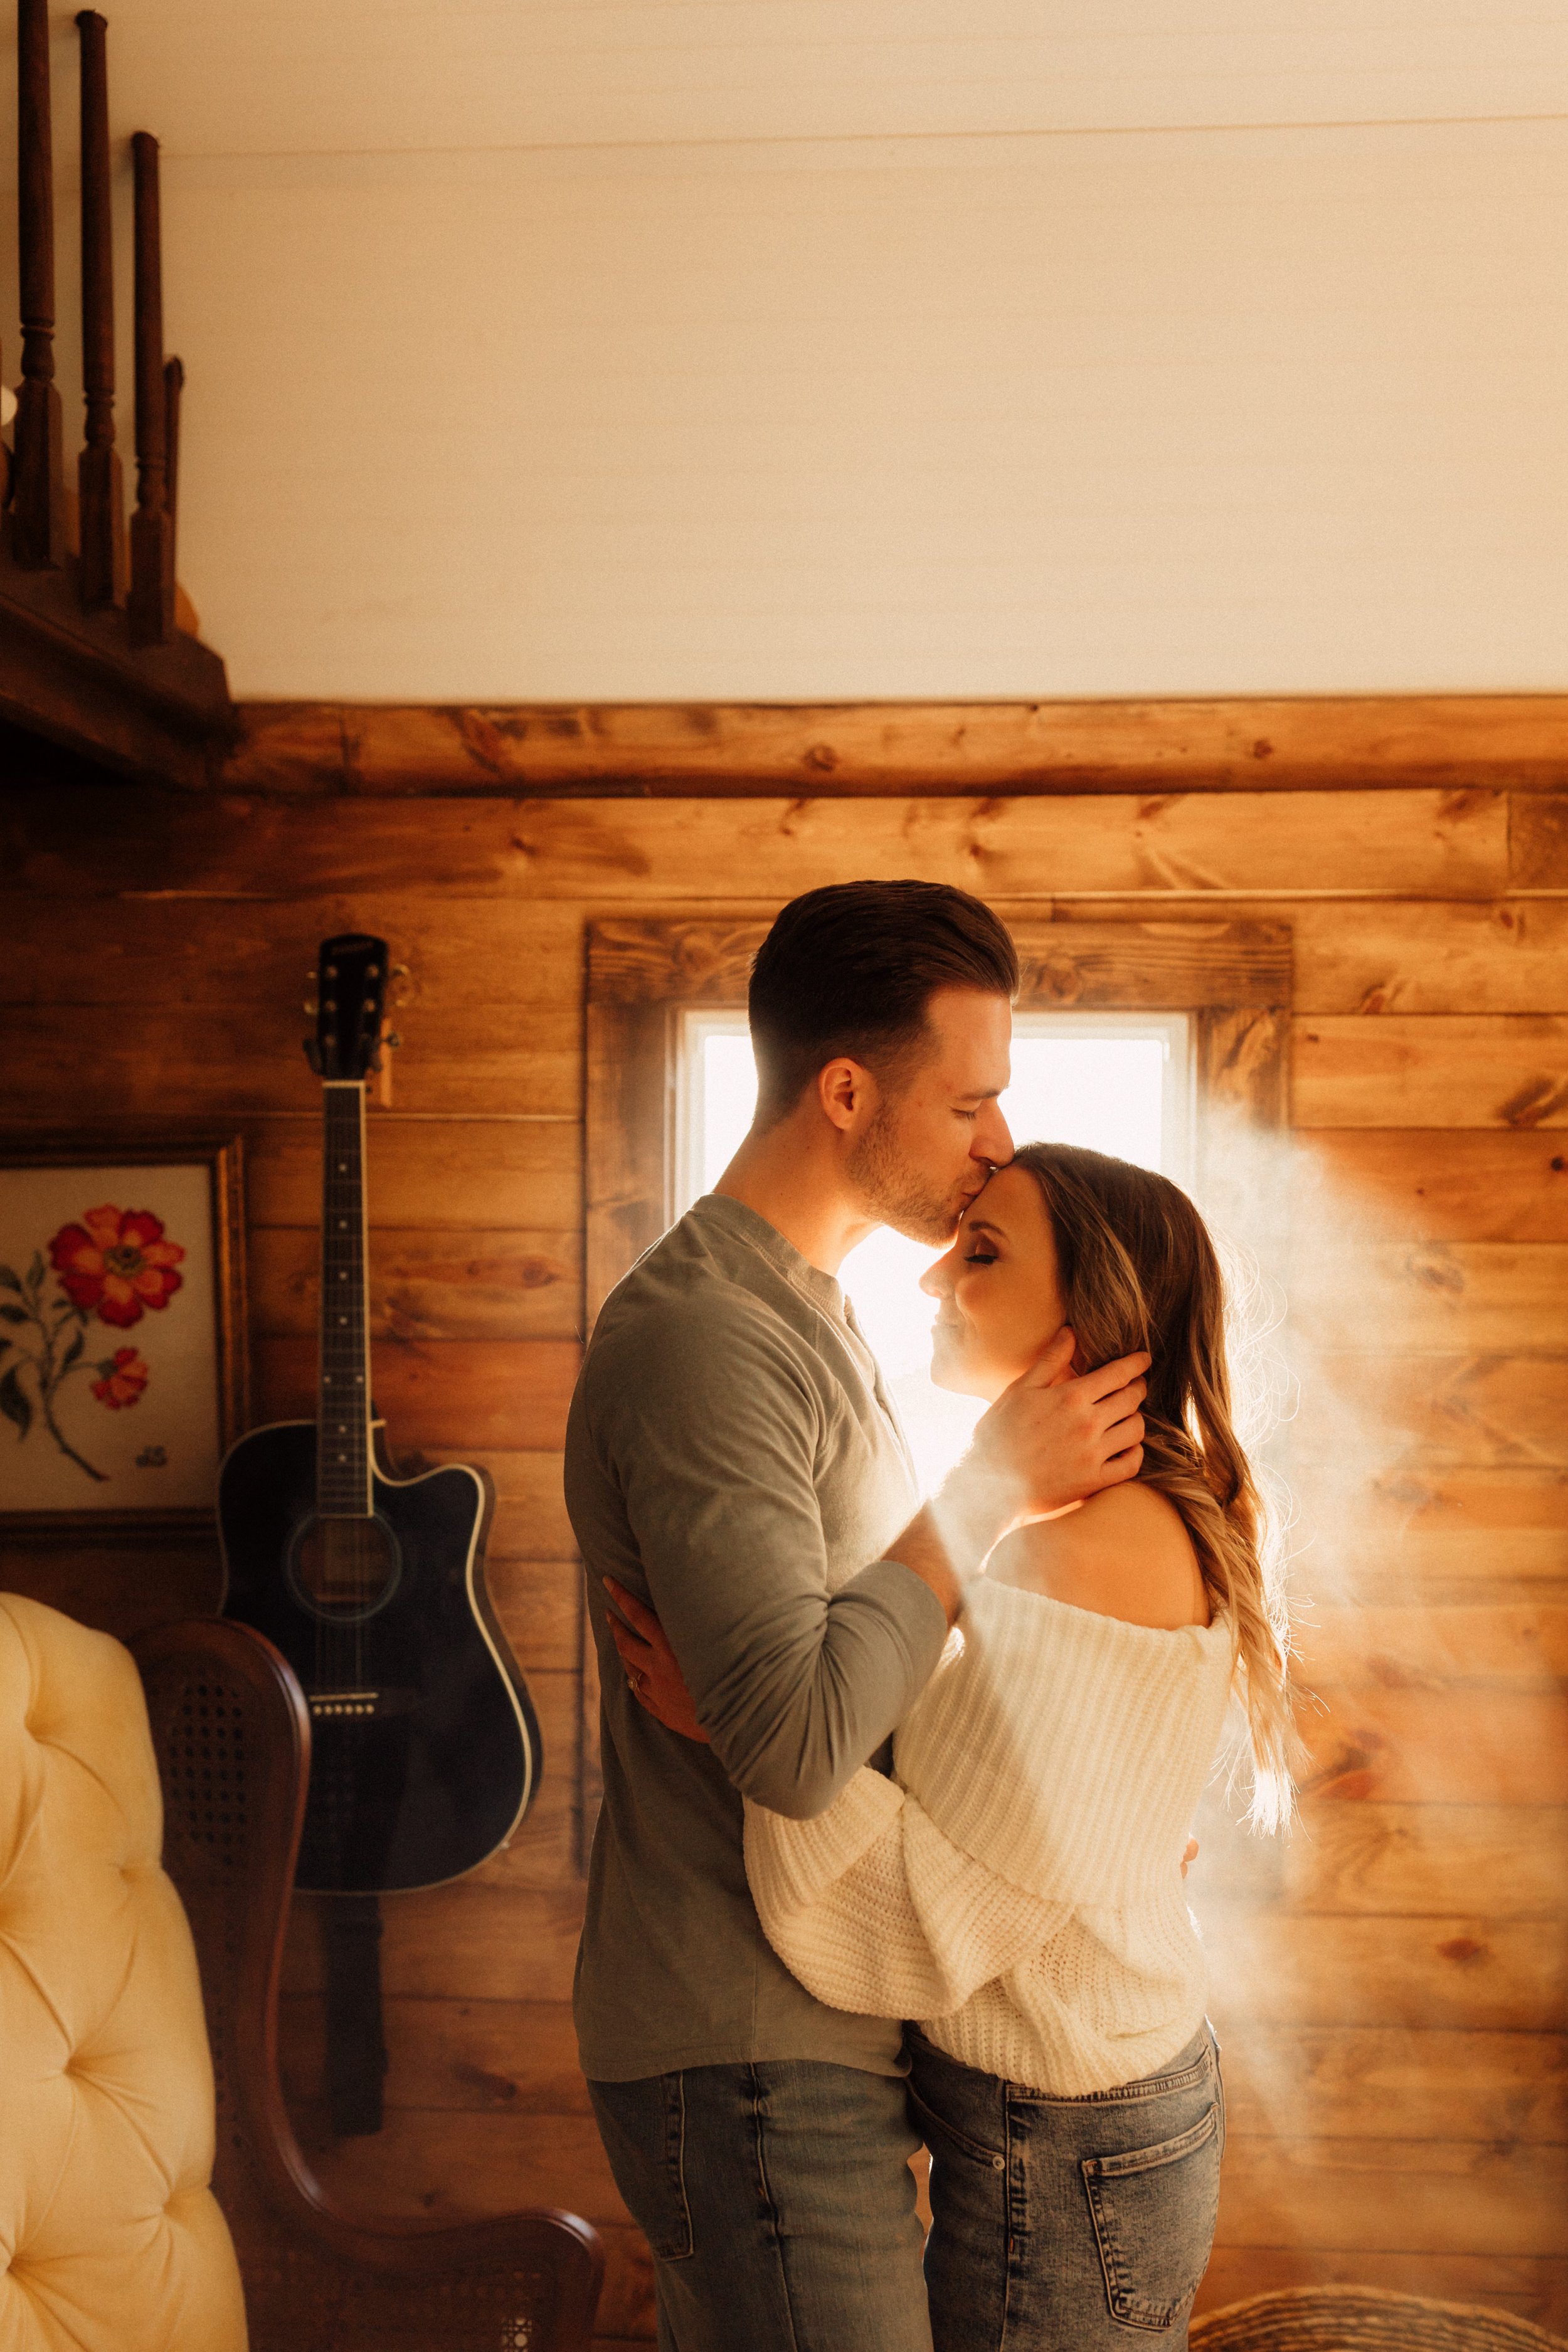 Laura_Ben_Engagment_Session_Winterset_Des_moines_Iowa_Couples_Photographer_Iris_Aisle_Cabin_Conservatory_Candid_Snow_Day_Winter_KMP_Photography-9874.jpg